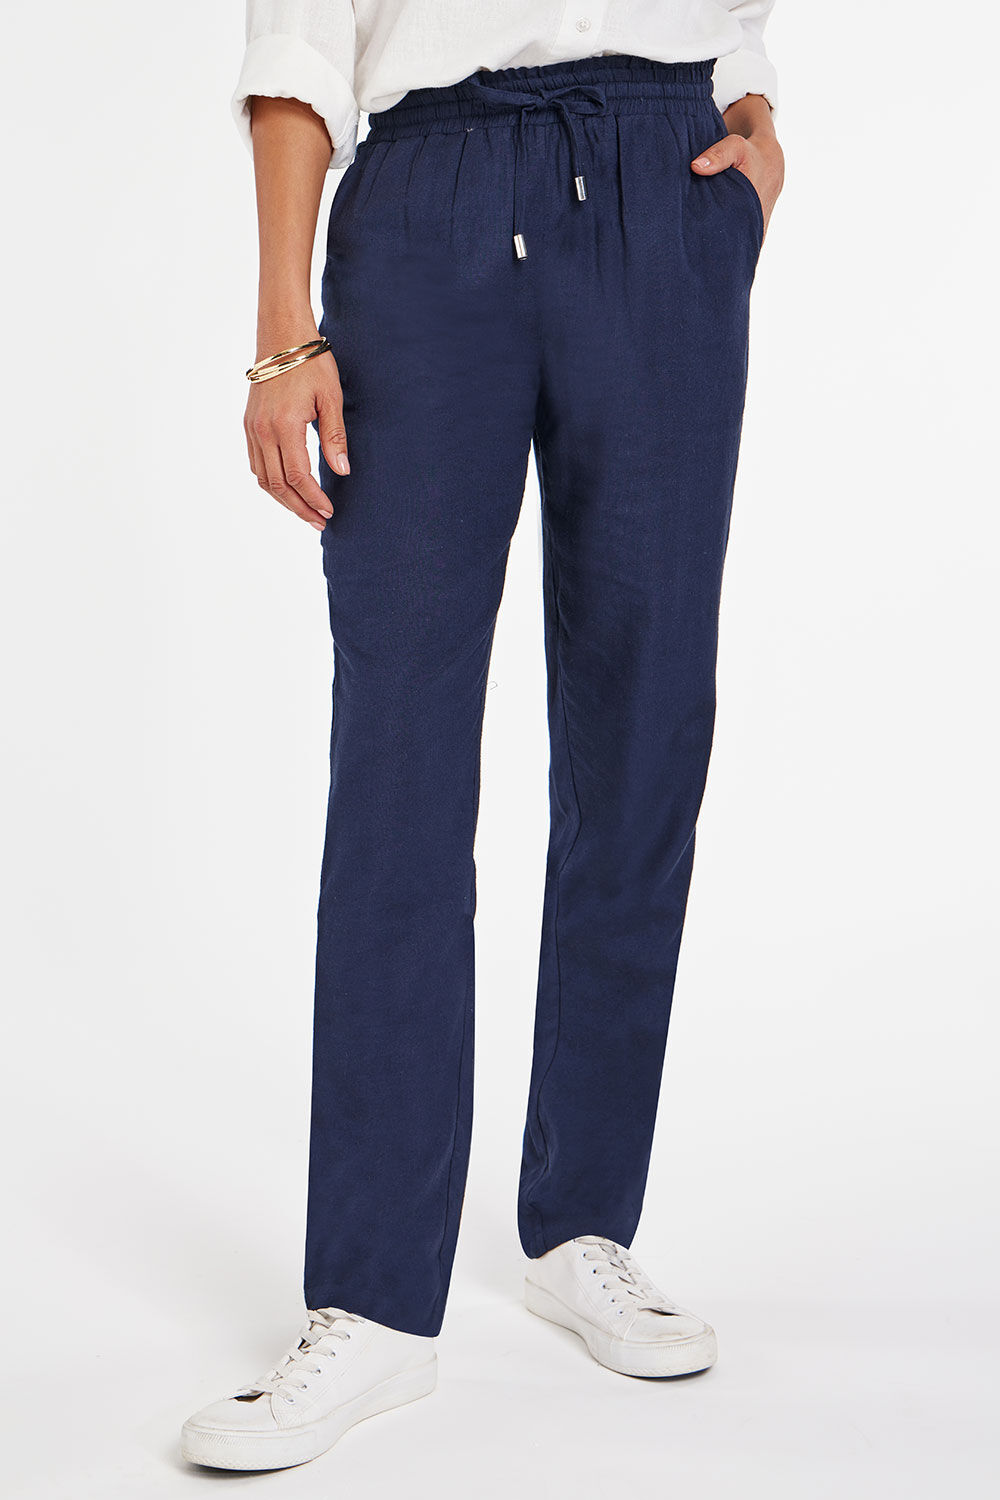 Bonmarche Navy Paperbag Tie Waist Tapered Linen Trousers, Size: 20